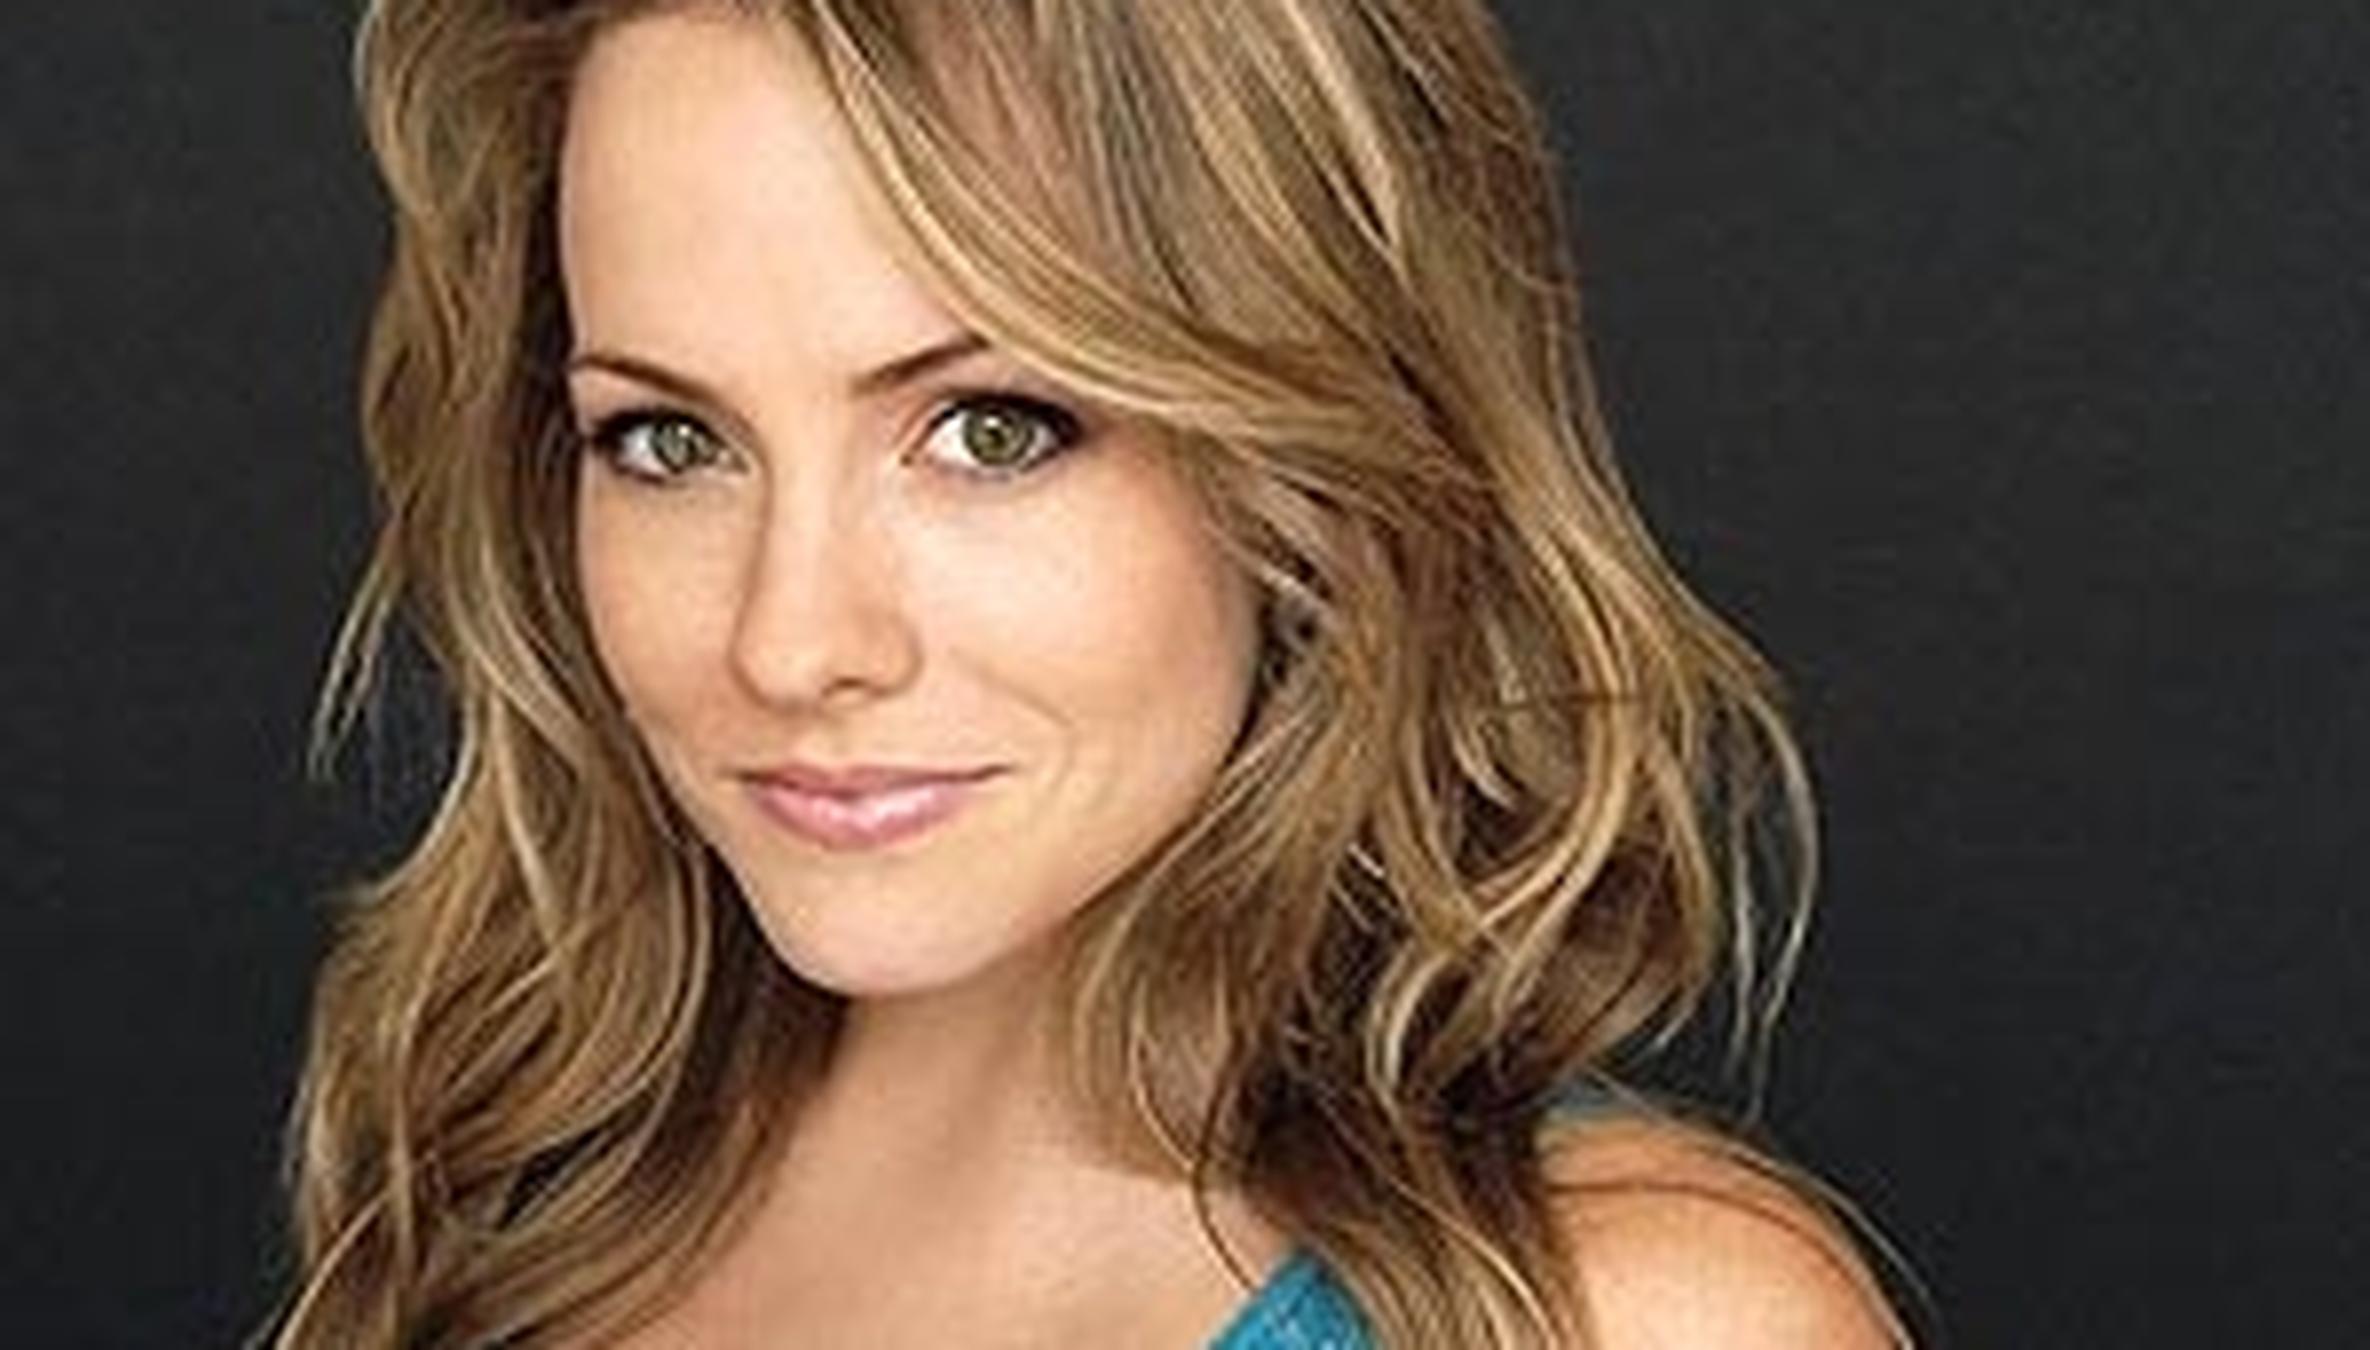 Kelly Stables' Height, Weight, Shoe Size and Body Measurements - Heigh...